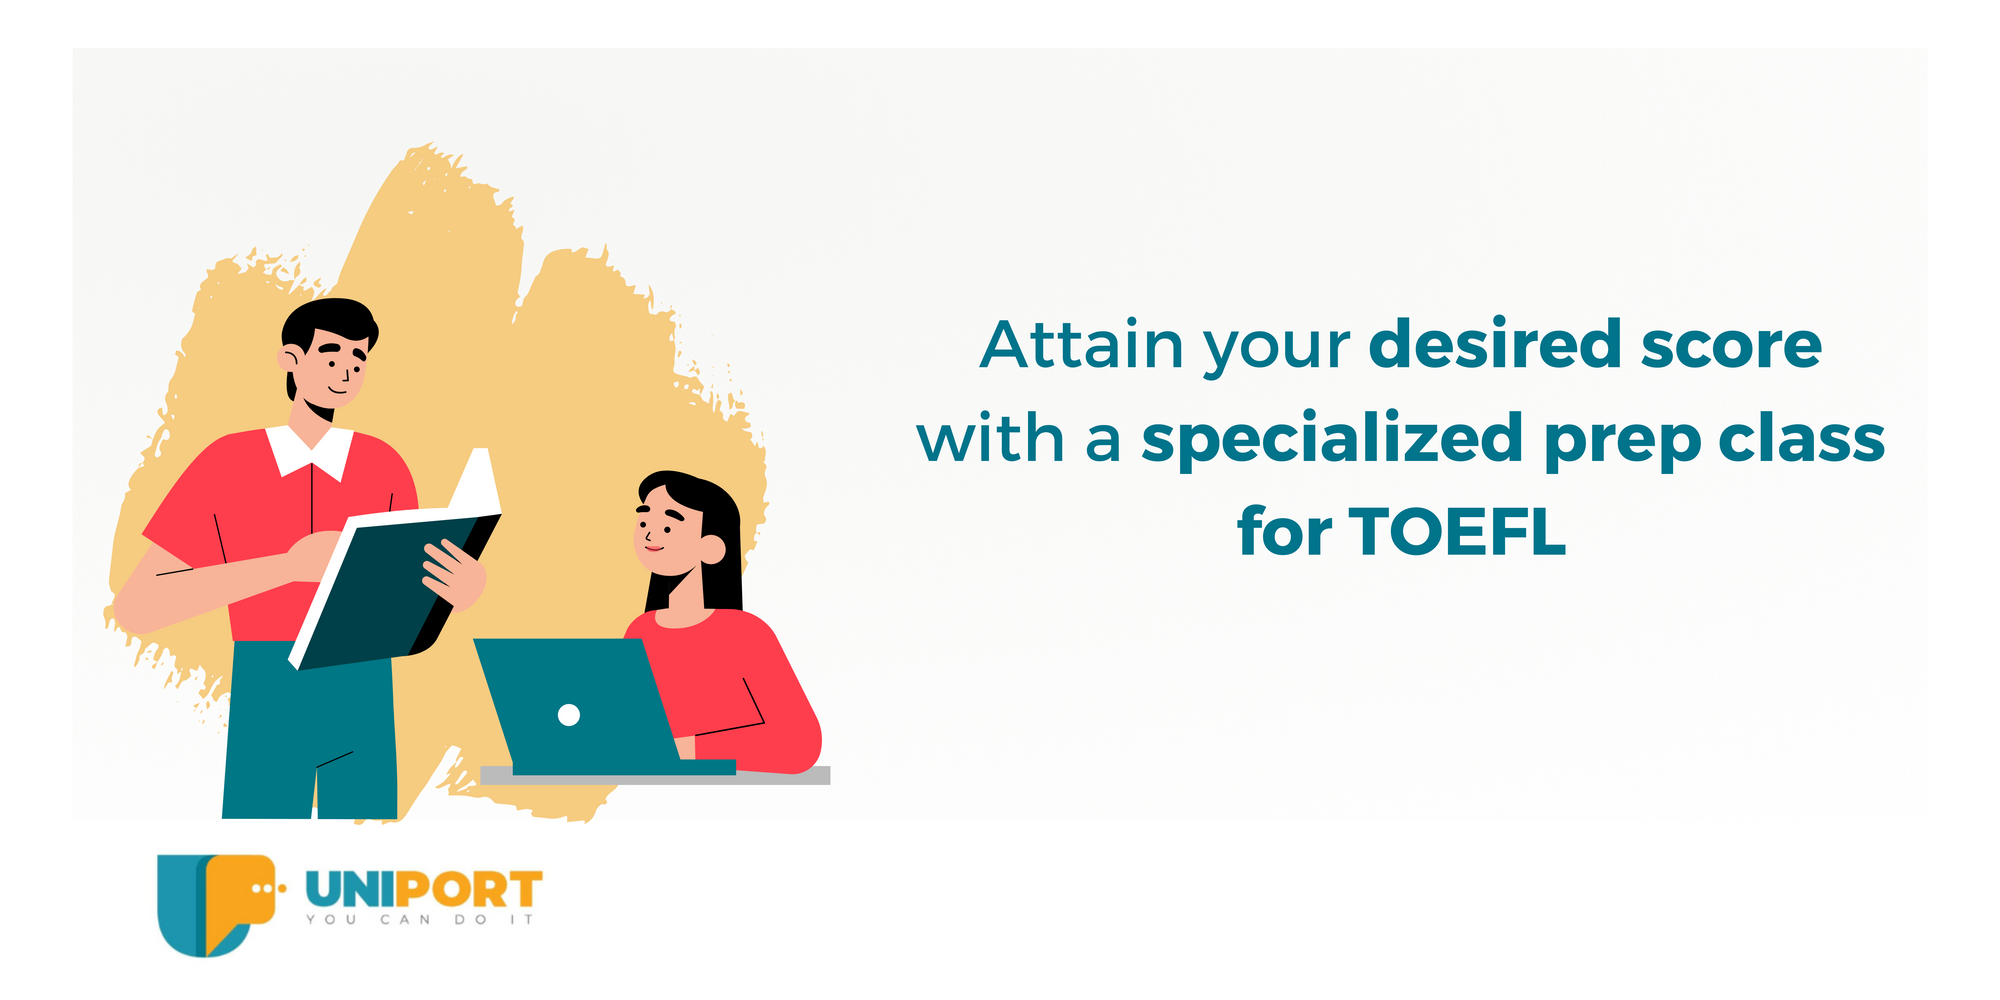 Attain your desired score with a specialized prep class for TOEFL